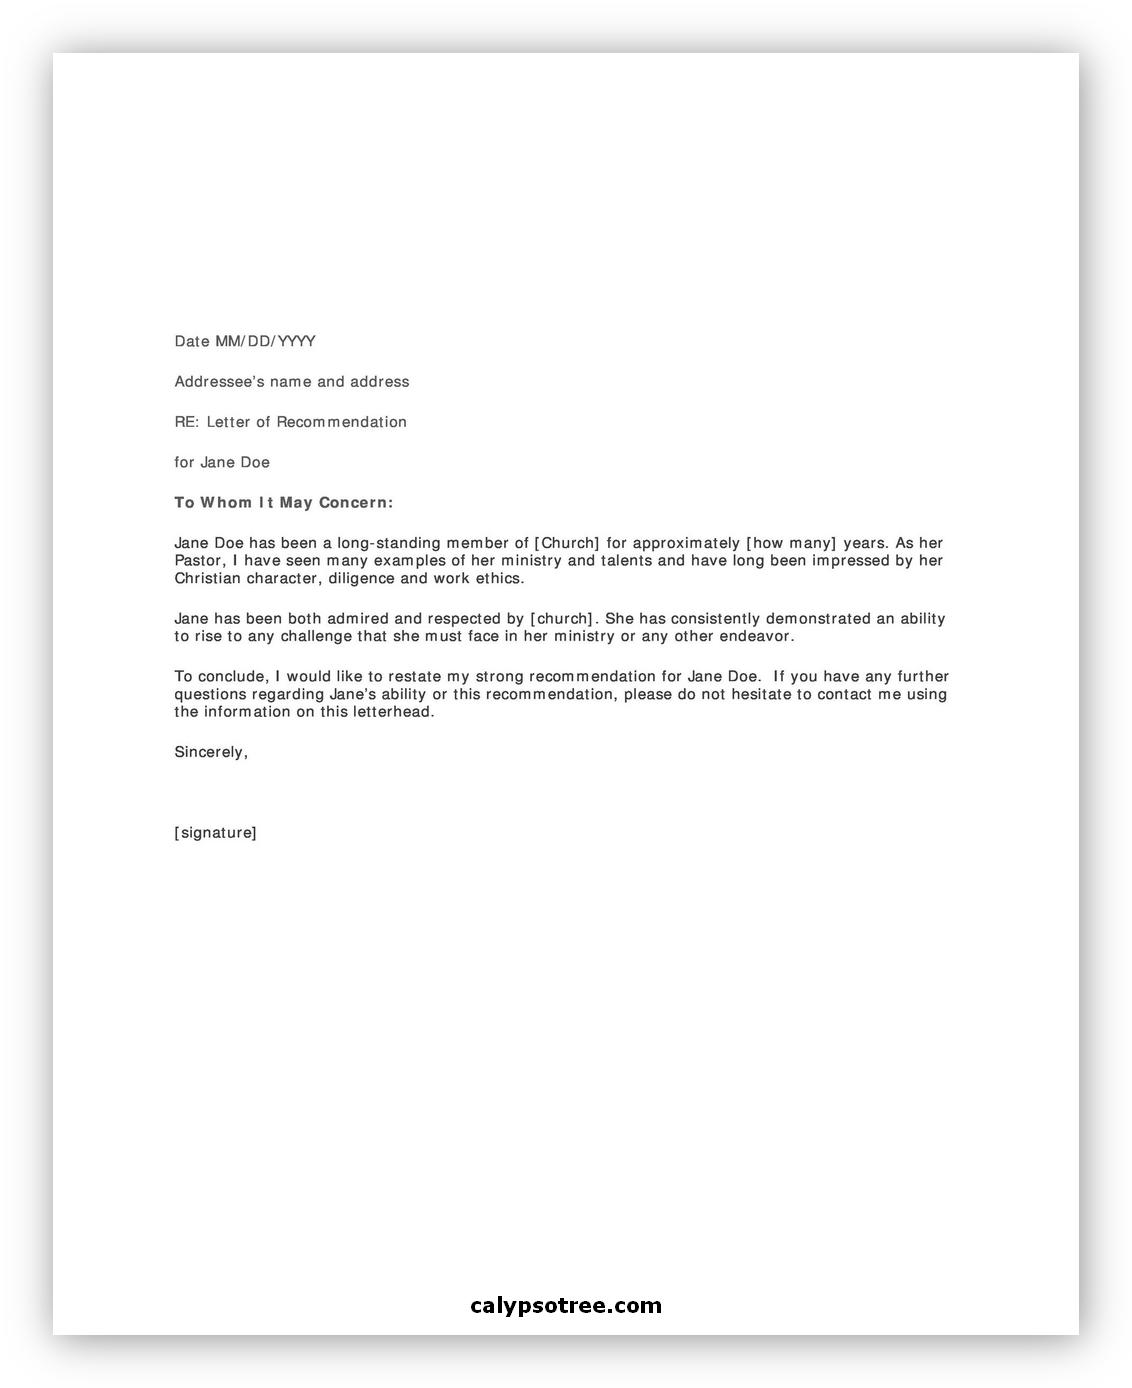 Letter of Recommendation Format 07